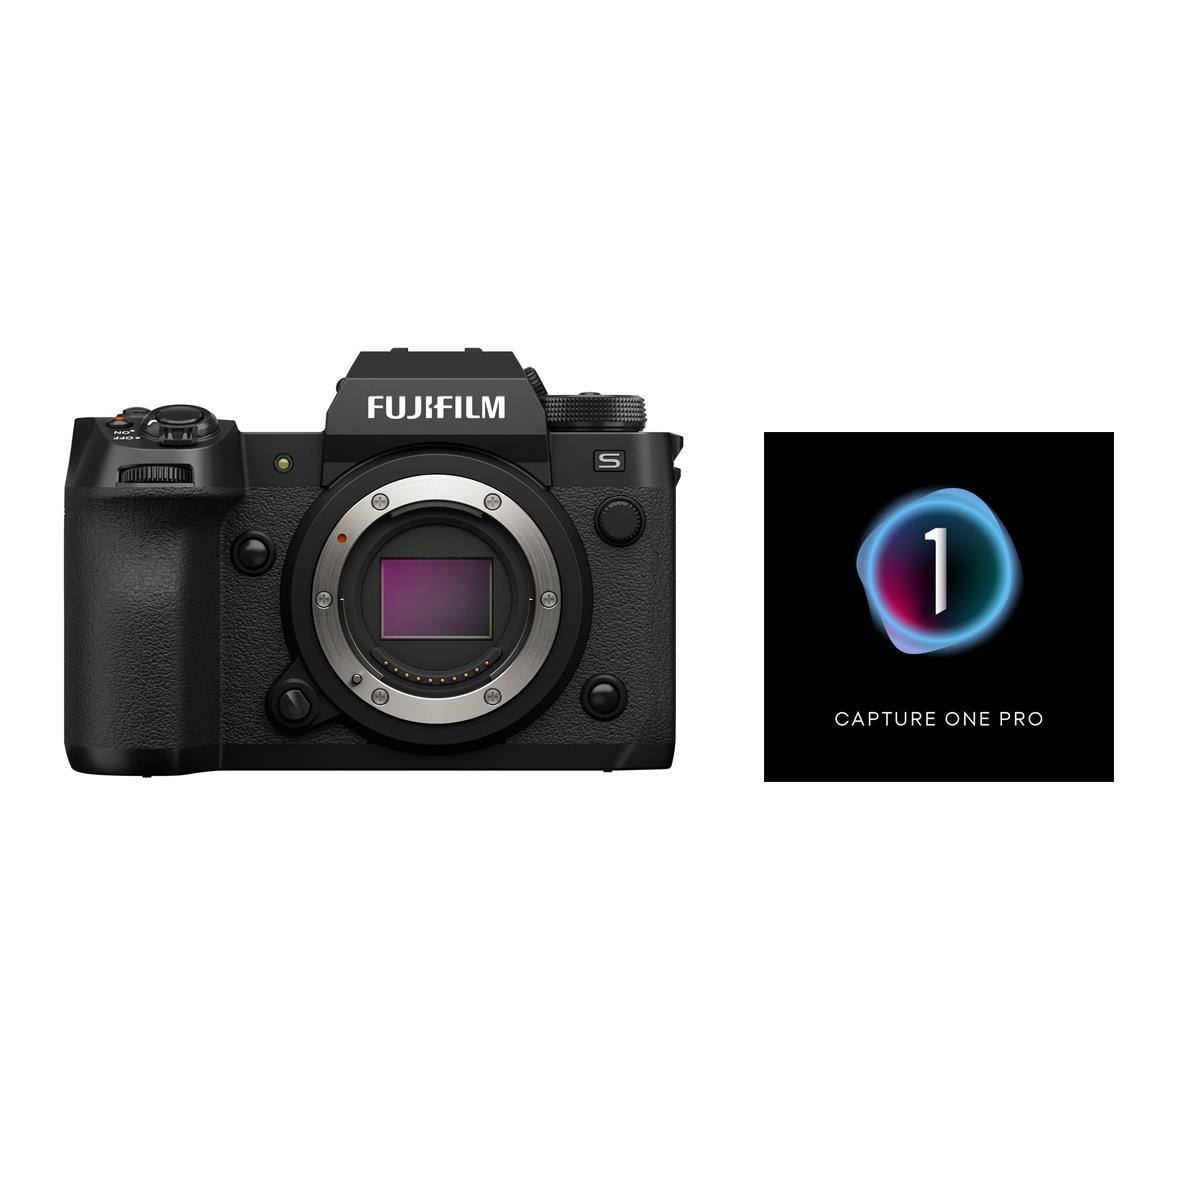 Image of Fujifilm X-H2S Mirrorless Camera with Capture One Pro